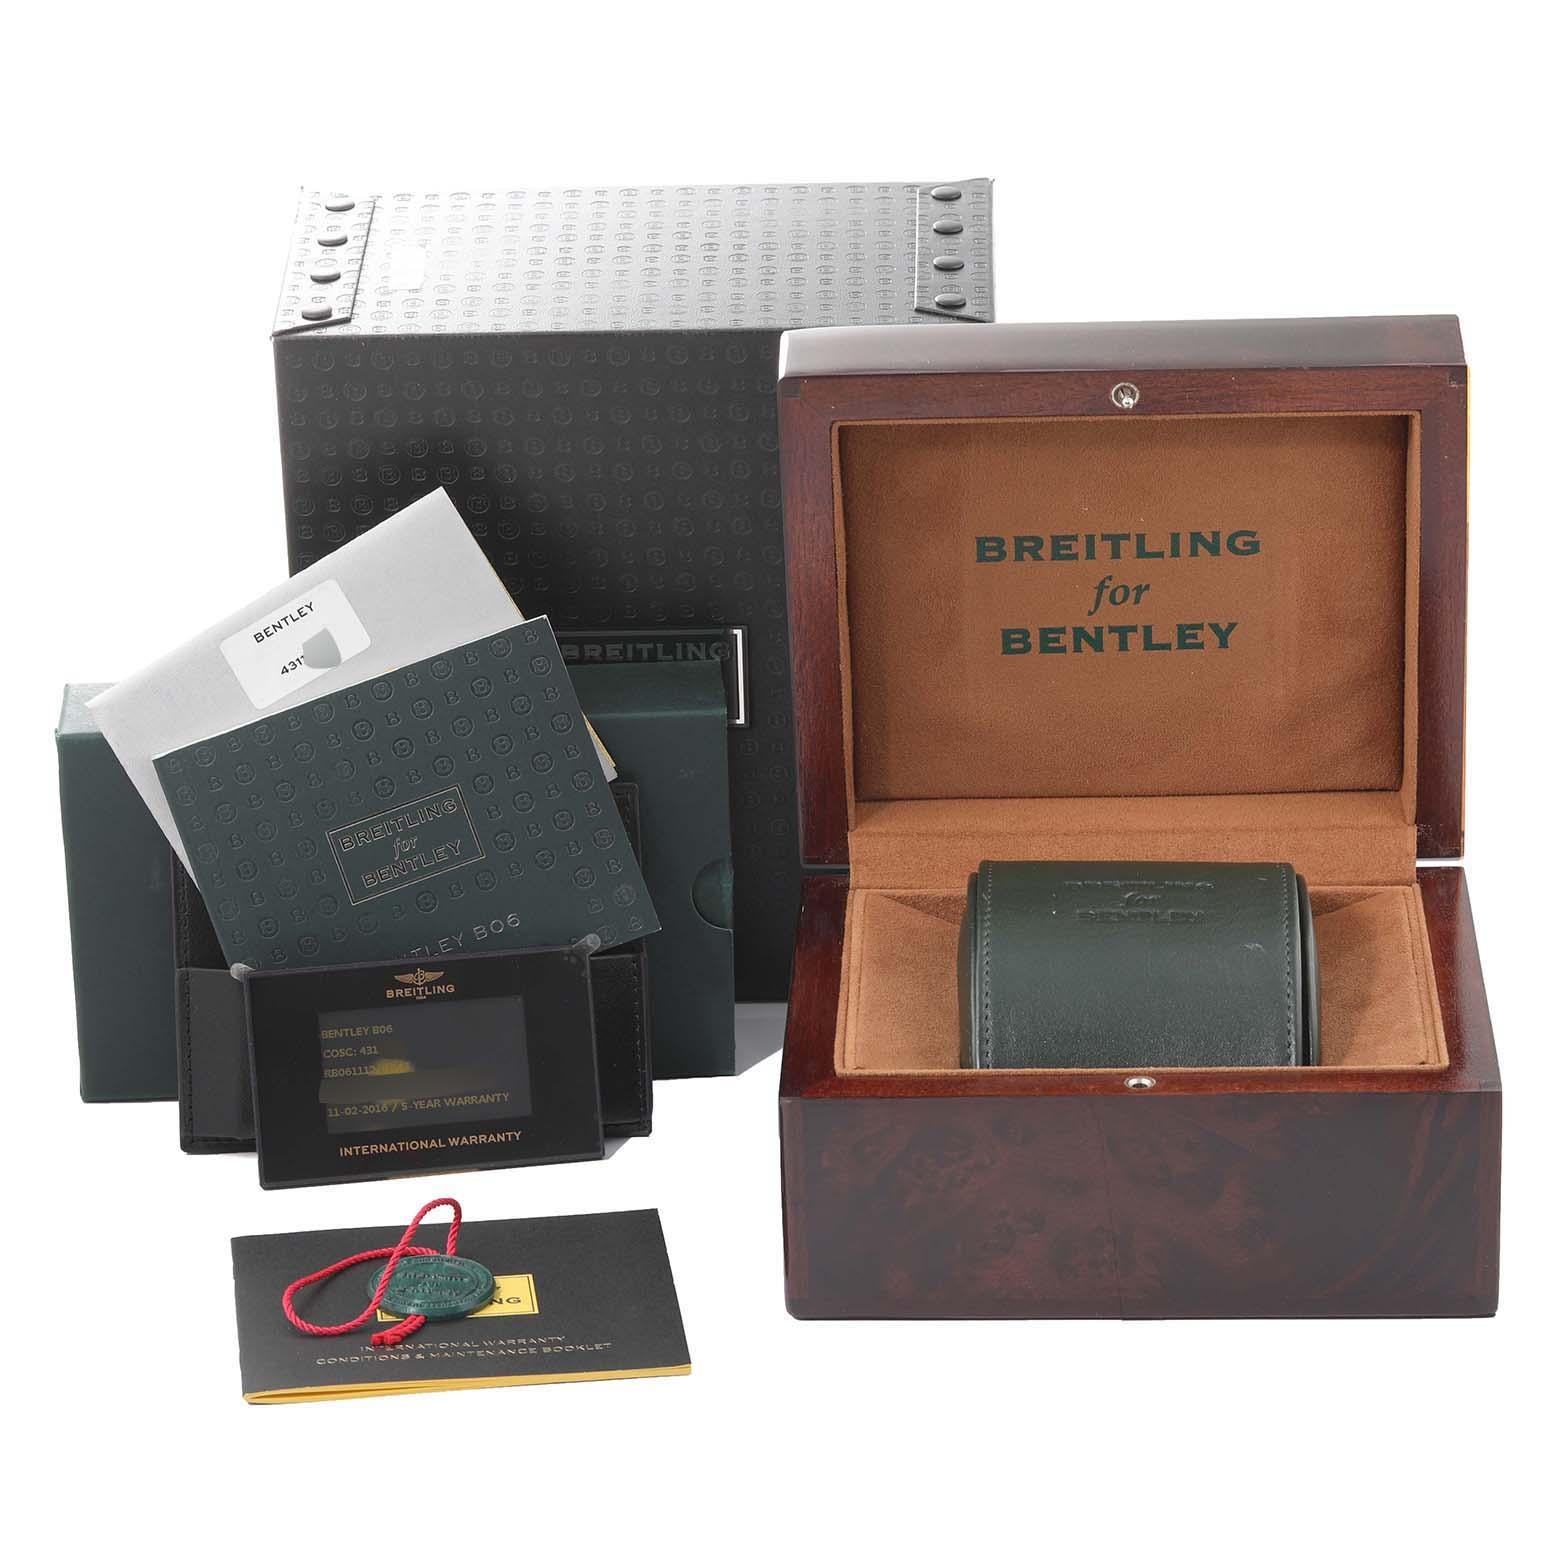 Breitling Bentley B06 Black Dial Rose Gold Mens Watch RB0611 Box Card. Self-winding automatic officially certified chronometer movement. Chronograph function. 18k rose gold case 49 mm in diameter. 18k rose gold screwed-down crown and pushers.